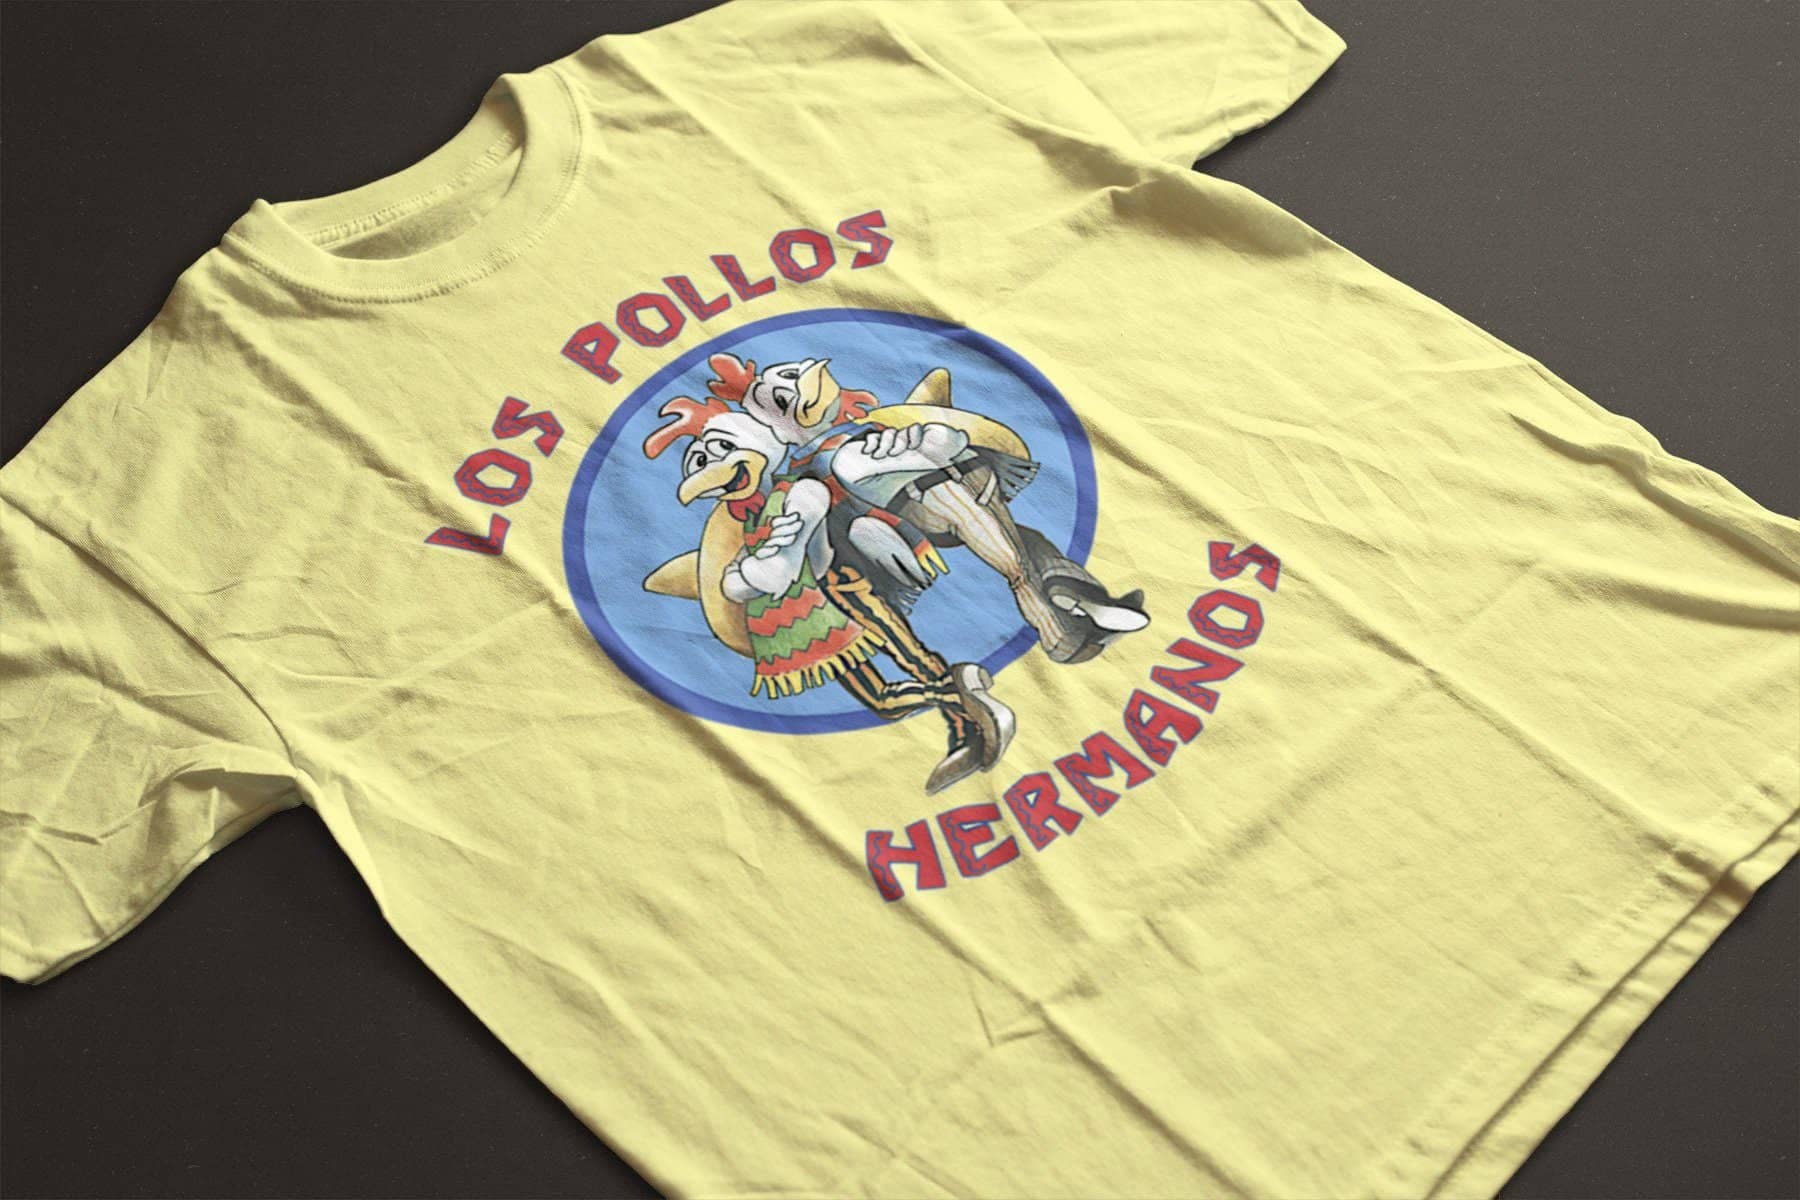 Los Pollos Hermanos Exclusive Yellow T Shirt for Men and Women | Premium Design | Catch My Drift India - Catch My Drift India  better call saul, clothing, general, hollywood, jimmy, made in i